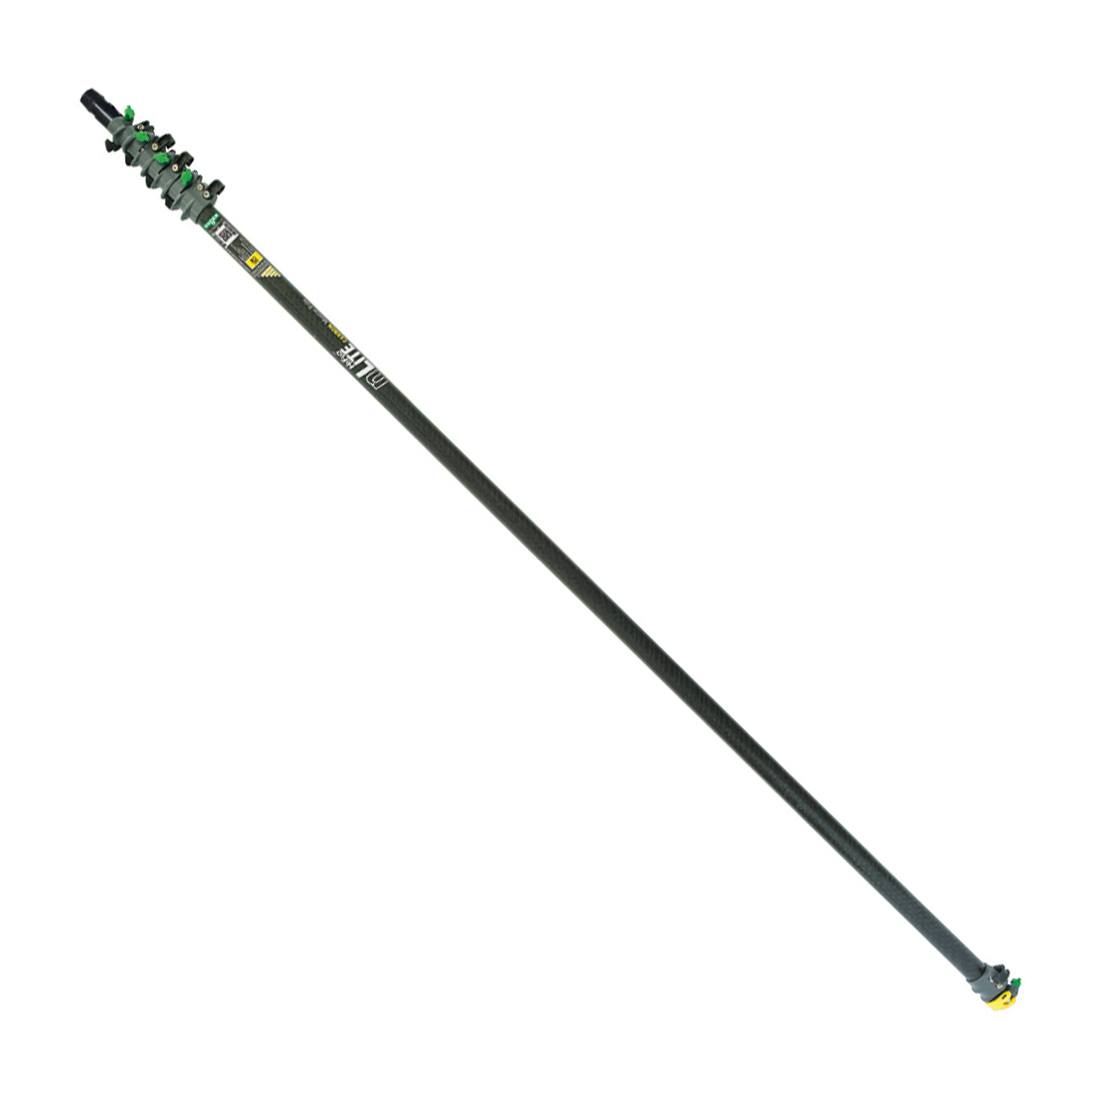 Unger nLite Carbon Master Pole - 22 Foot - Main Product View